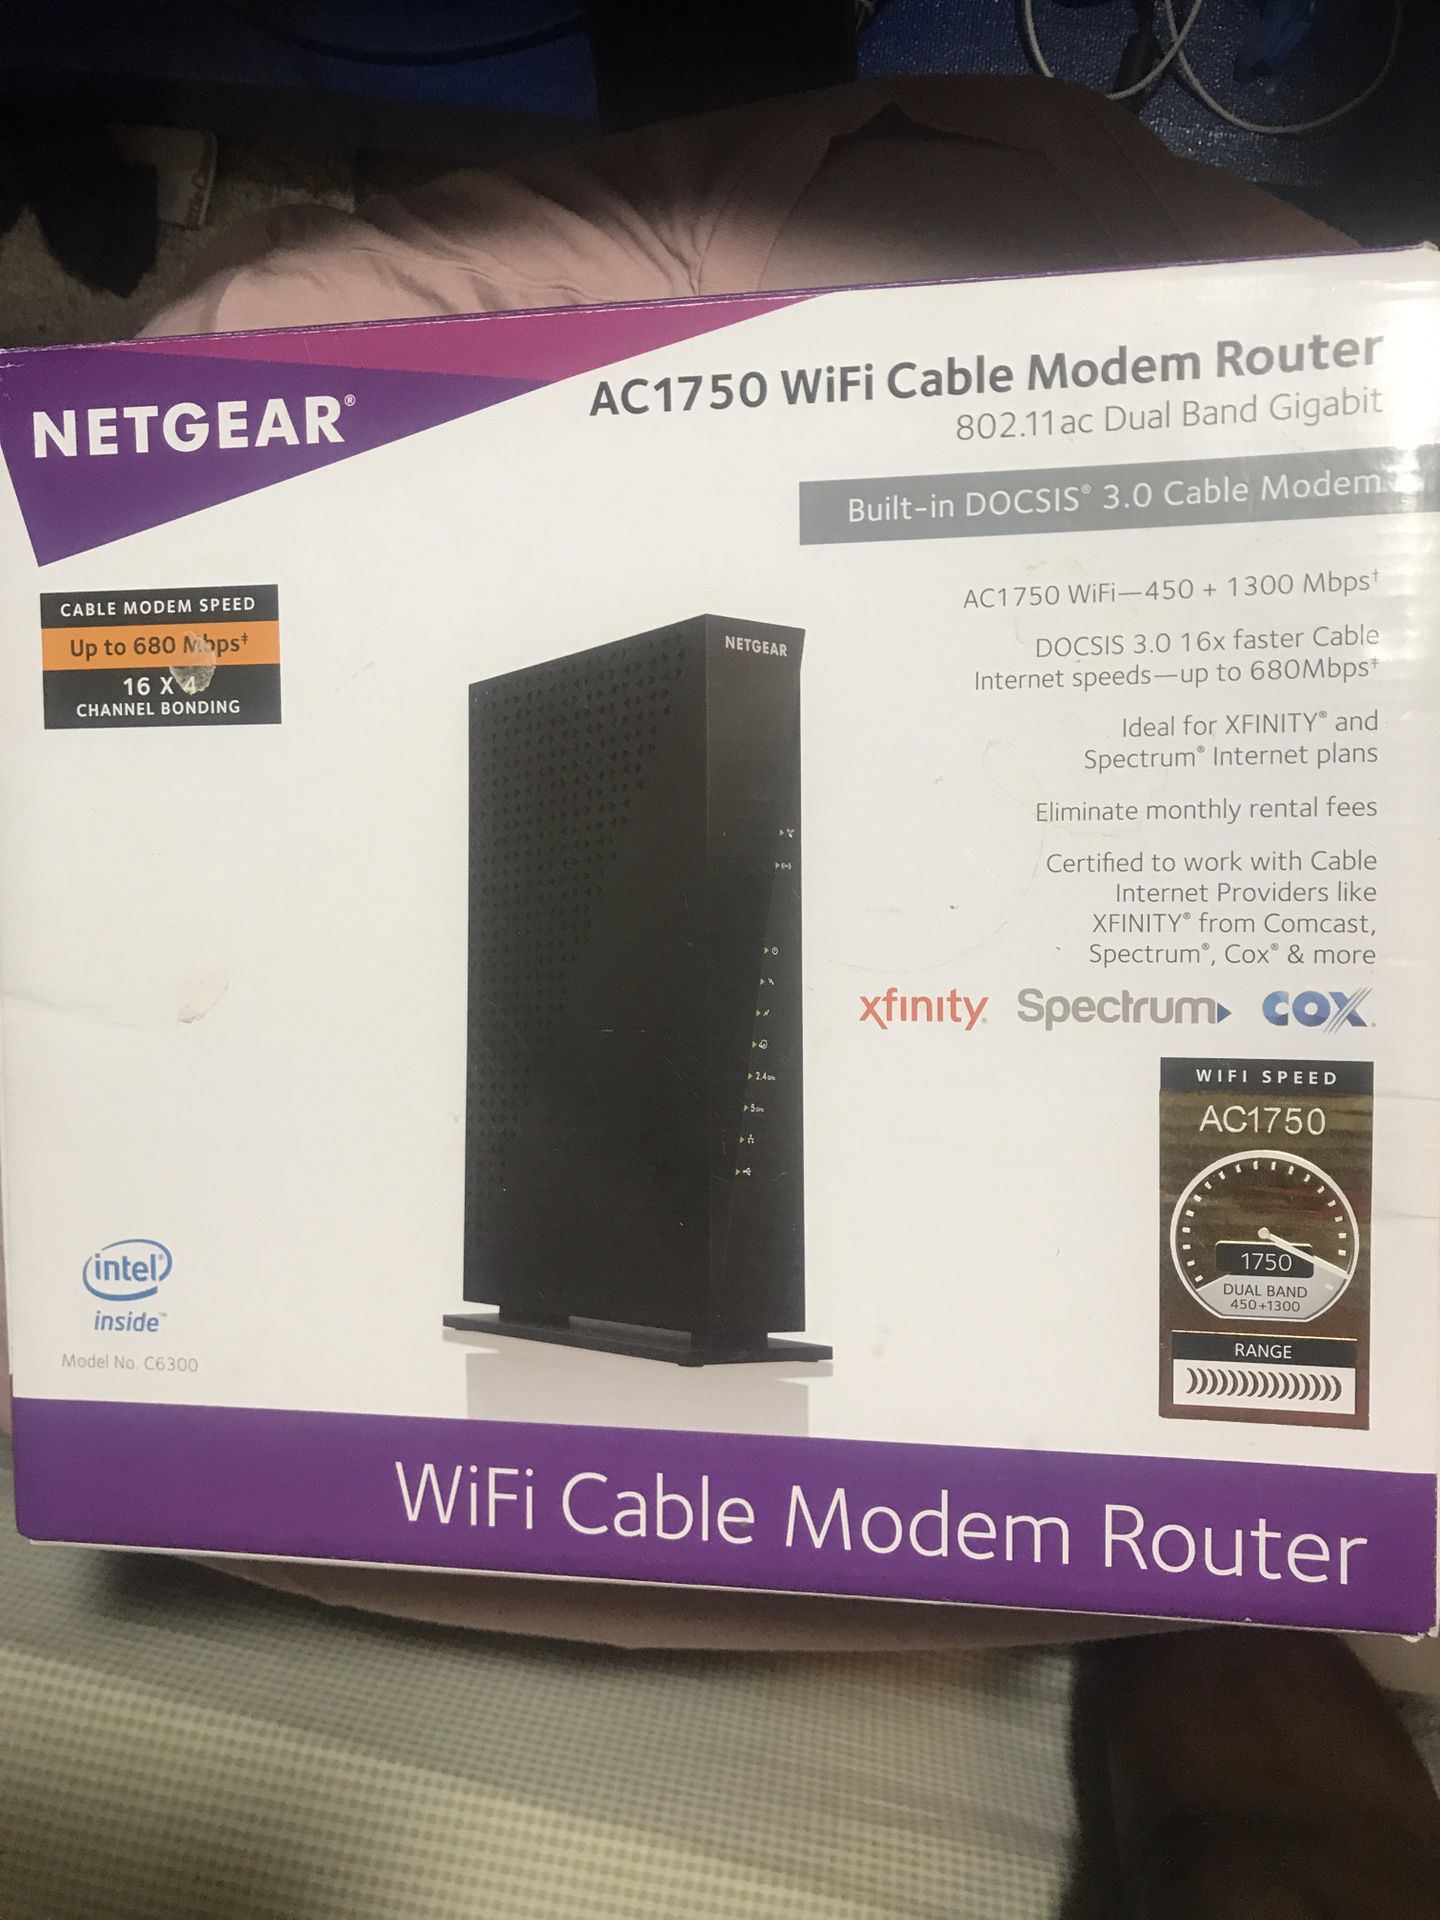 BRAND NEW NETGEAR C6300 WIFI CABLE MODEM ROUTER COMBO